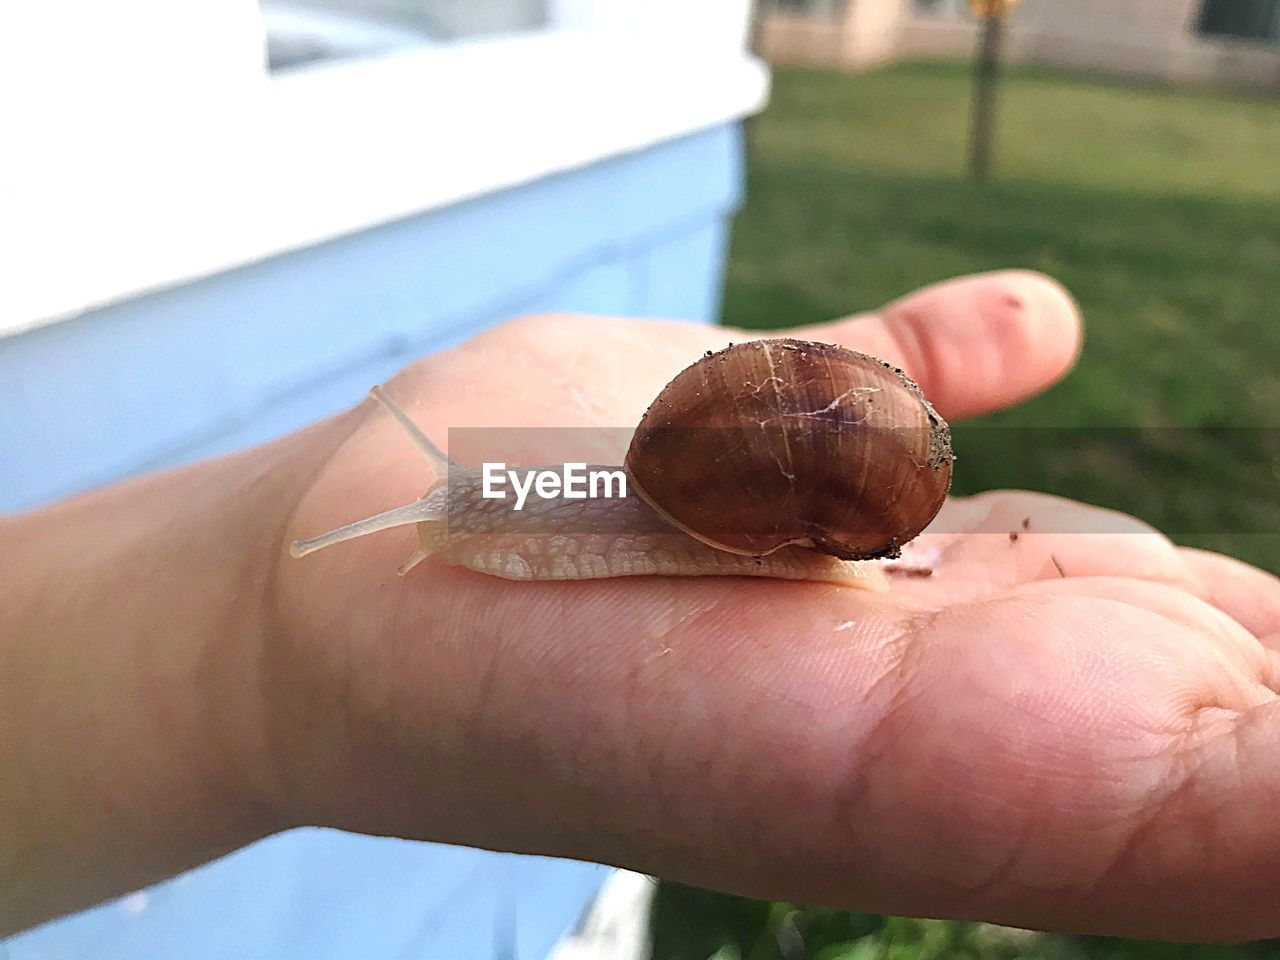 CLOSE-UP OF SNAIL ON PERSON HAND